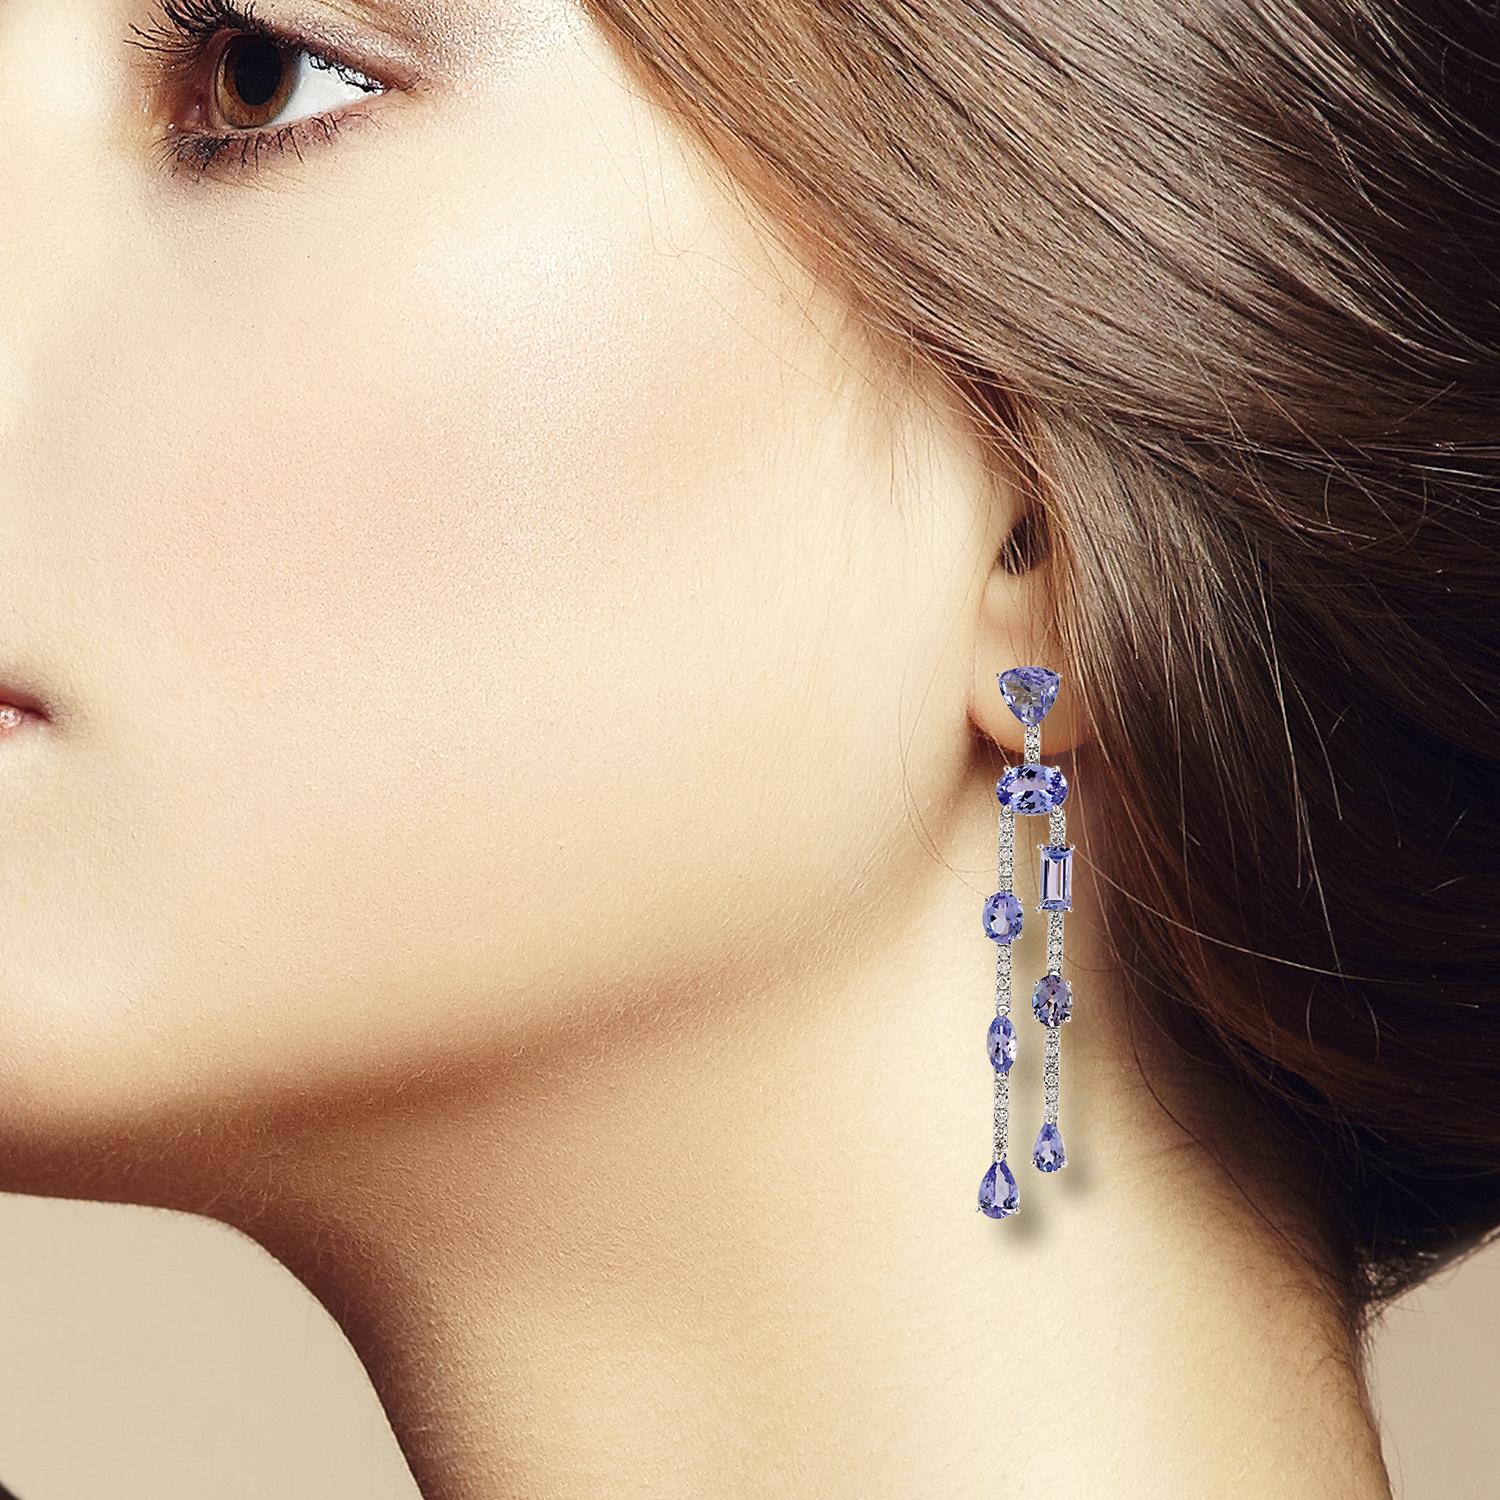 Cast from 14-karat gold, these beautiful earrings are hand set with 6.78 carats tanzanite and .49 carats of sparkling diamonds. 

FOLLOW  MEGHNA JEWELS storefront to view the latest collection & exclusive pieces.  Meghna Jewels is proudly rated as a